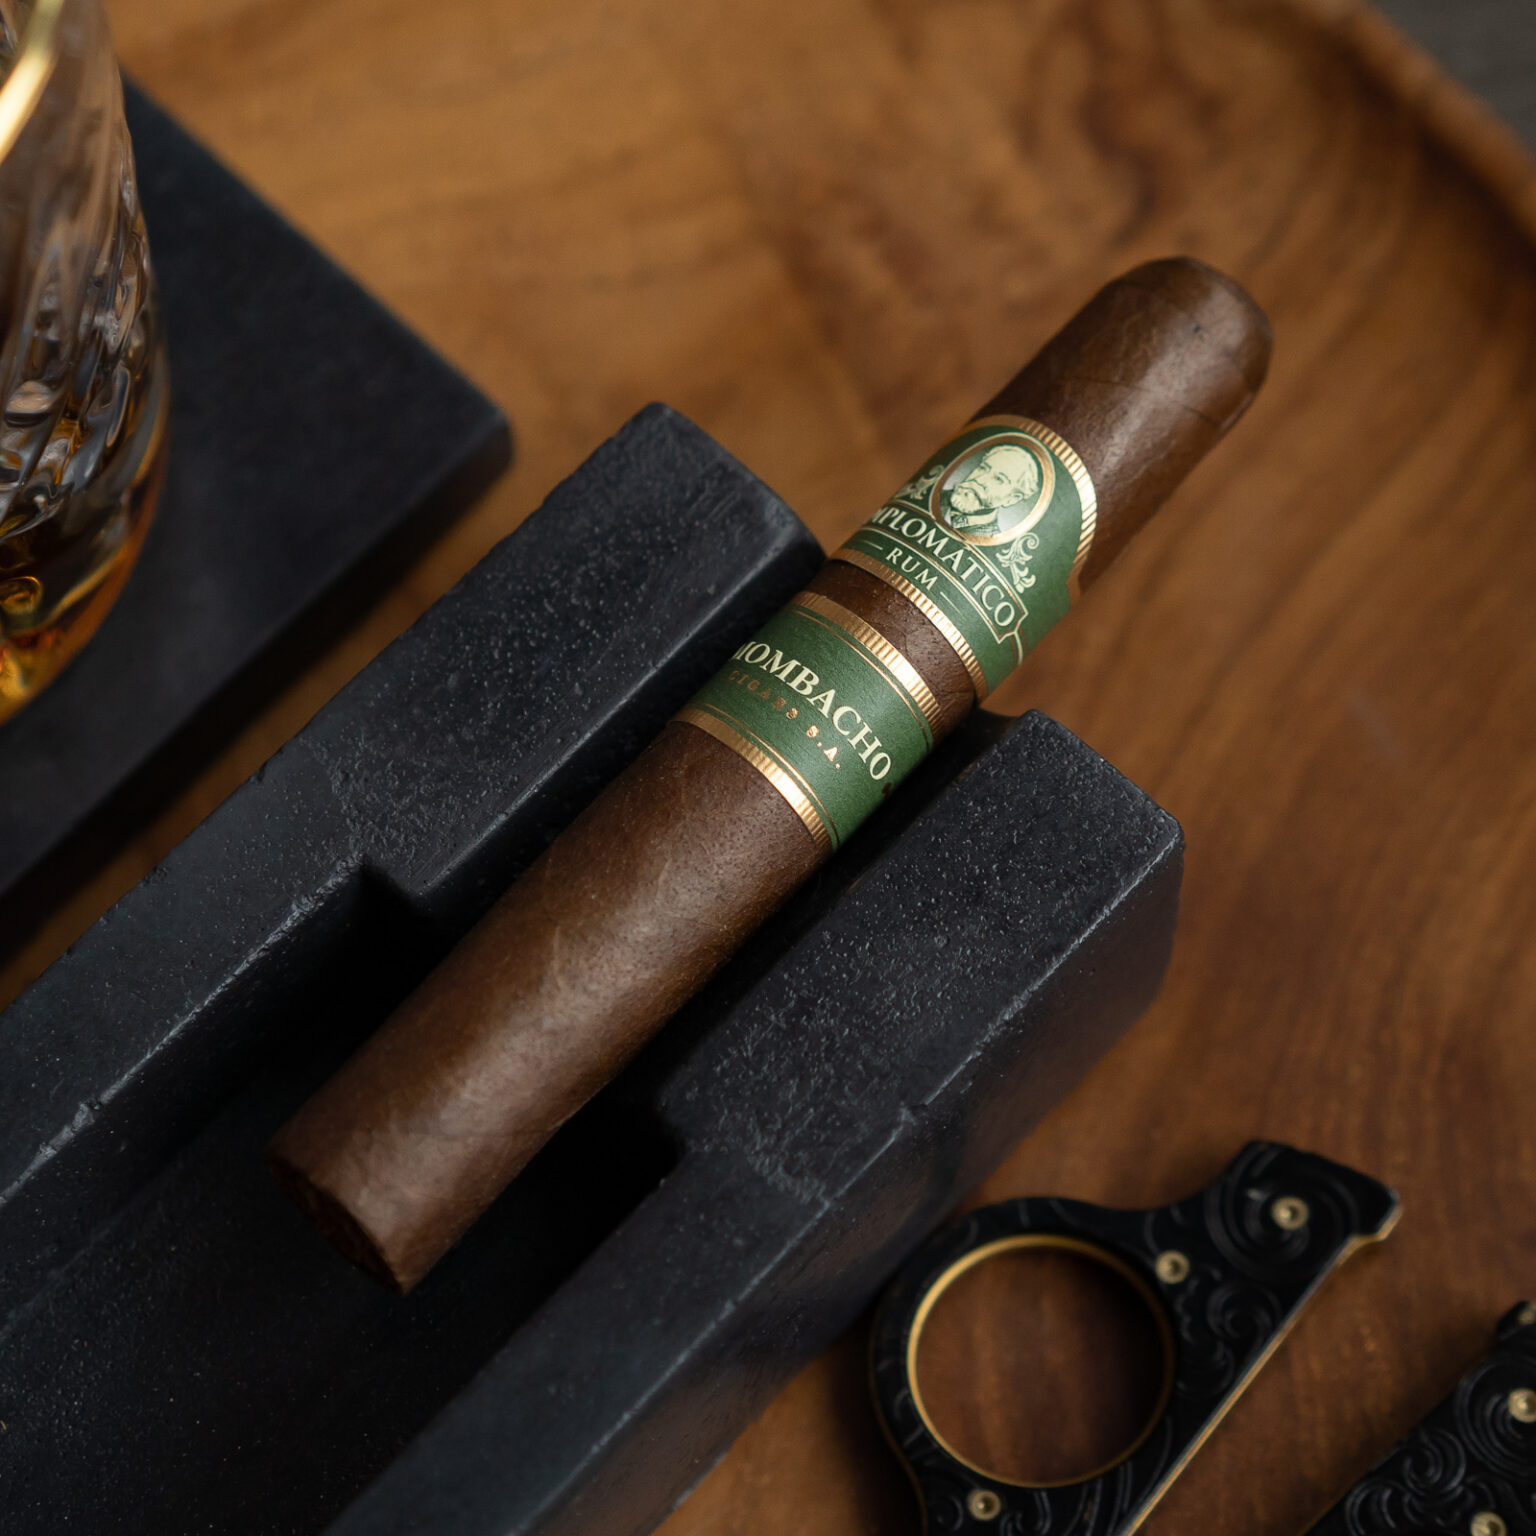 Blind Review Diplomatico By Mombacho Cigars Fine Tobacco Nyc